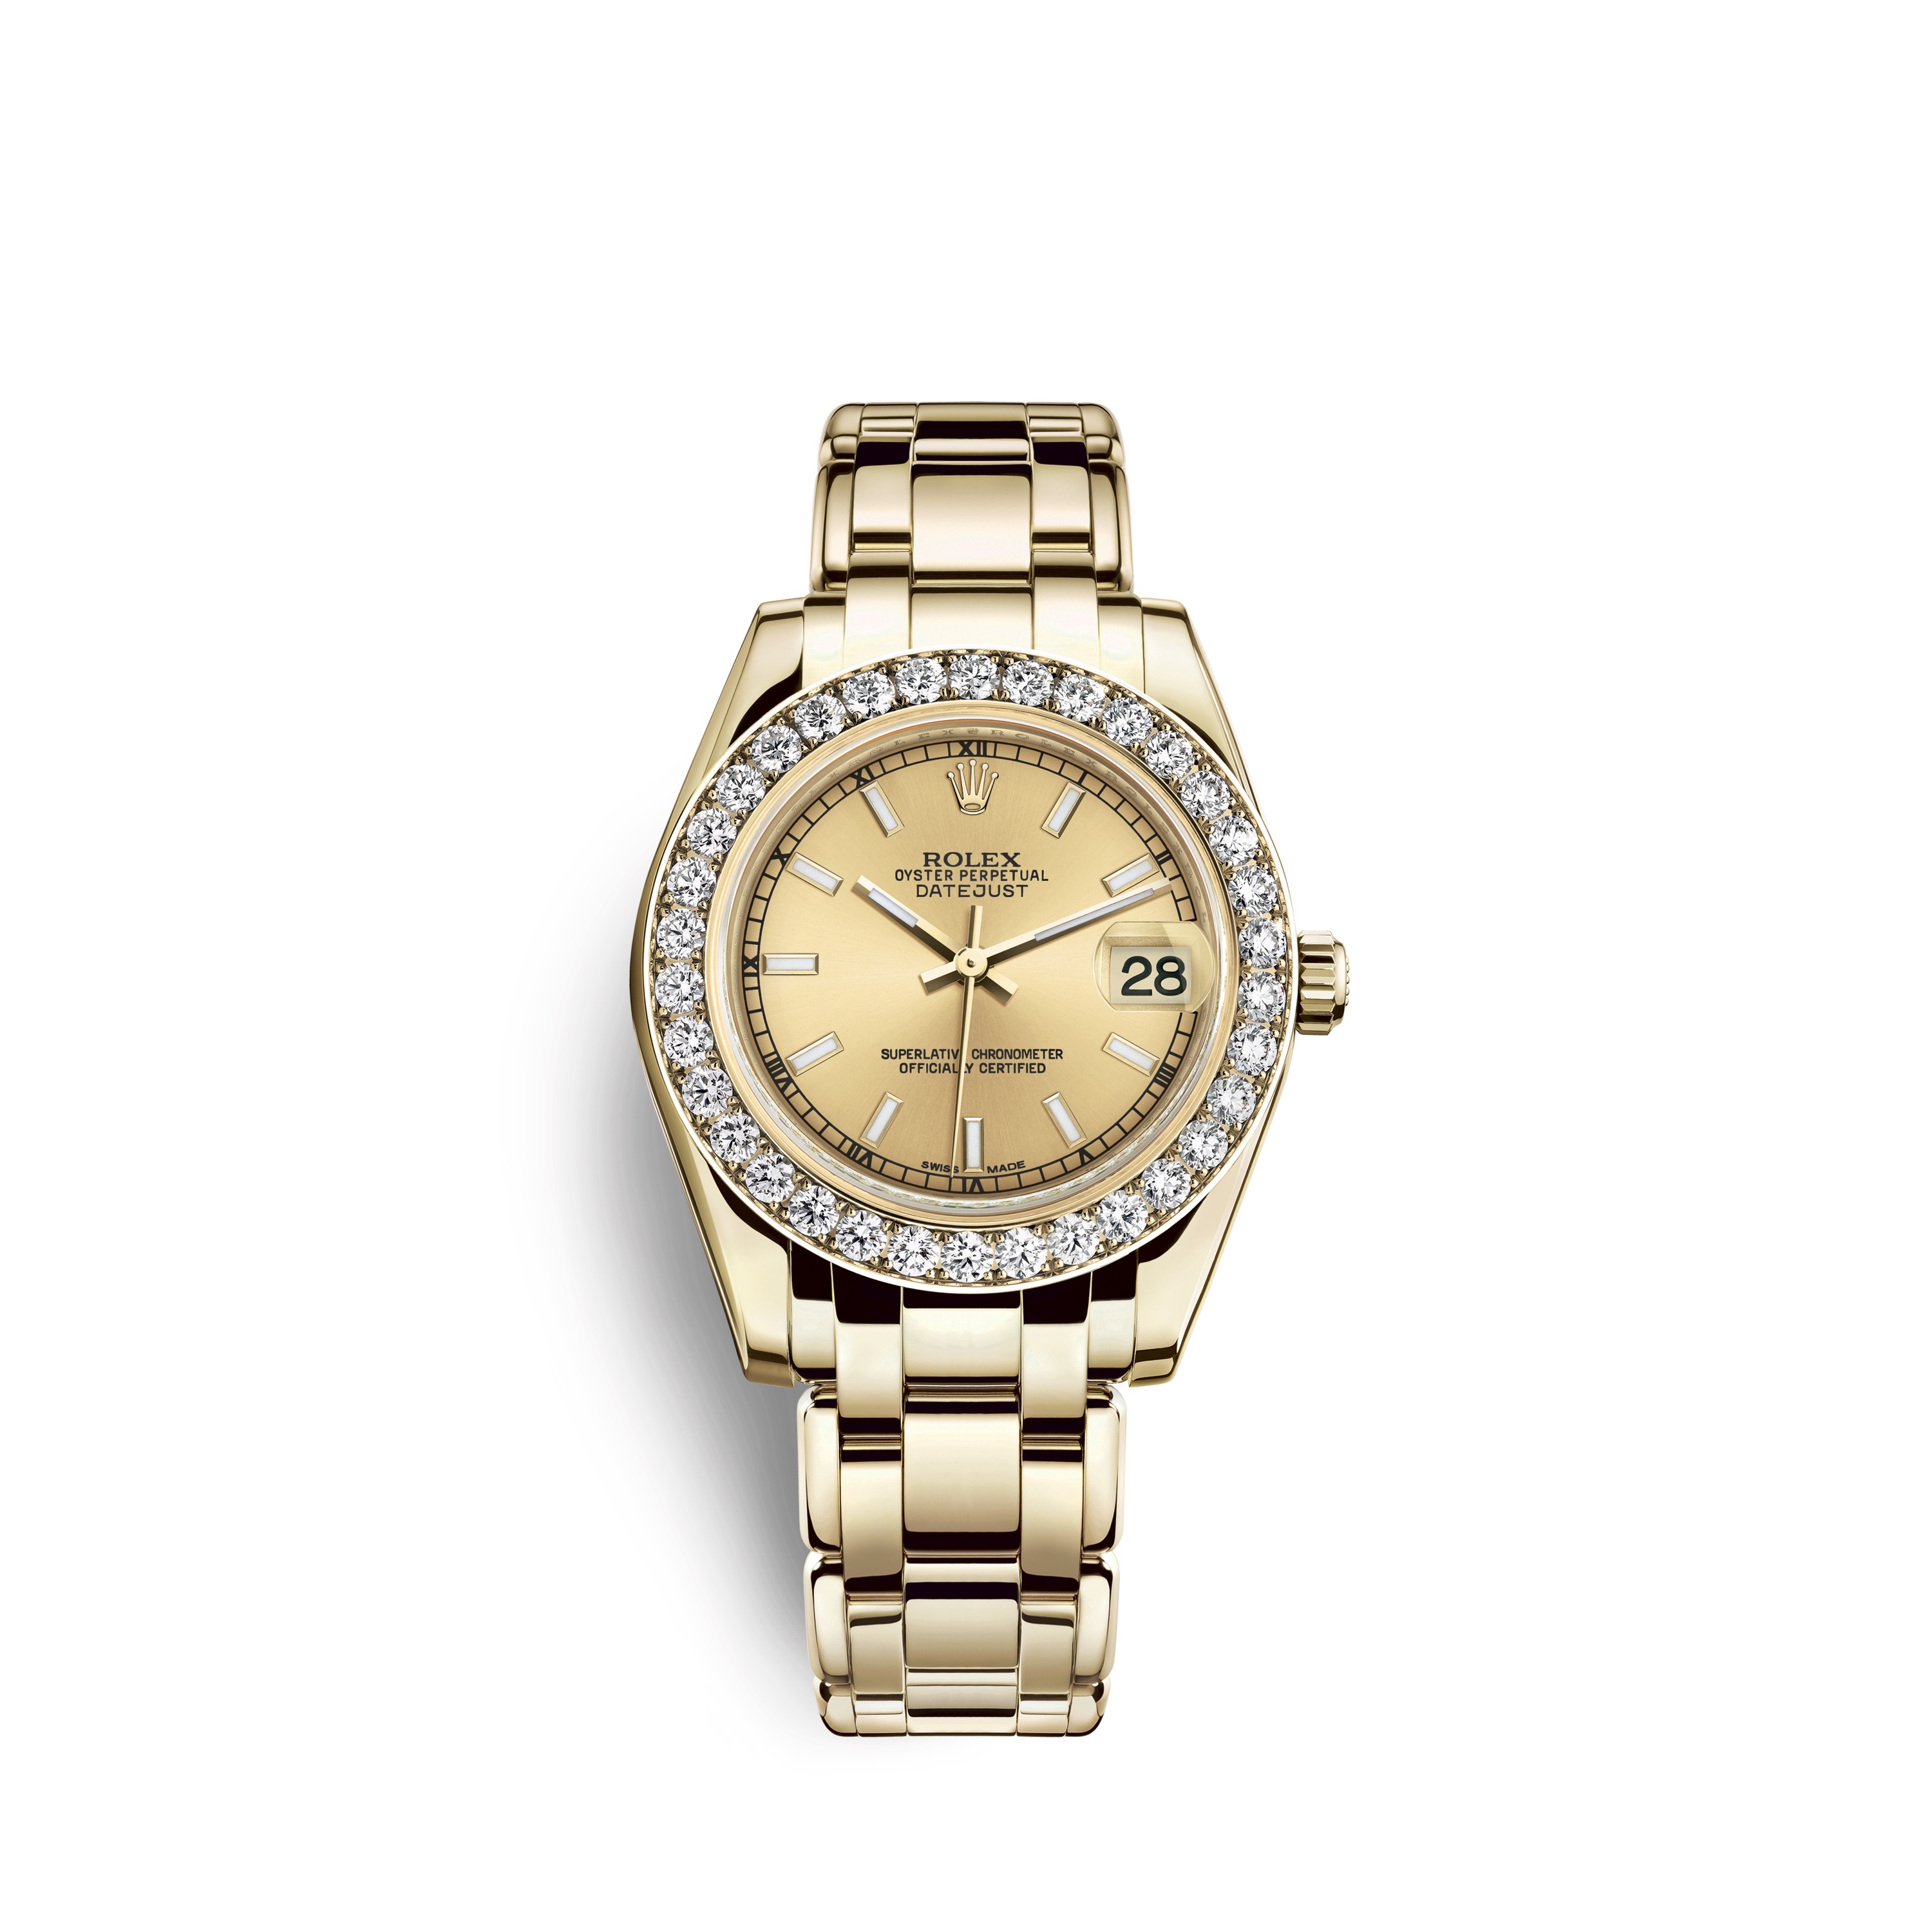 Pearlmaster 34 81298 Gold & Diamonds Watch (Champagne-Colour)